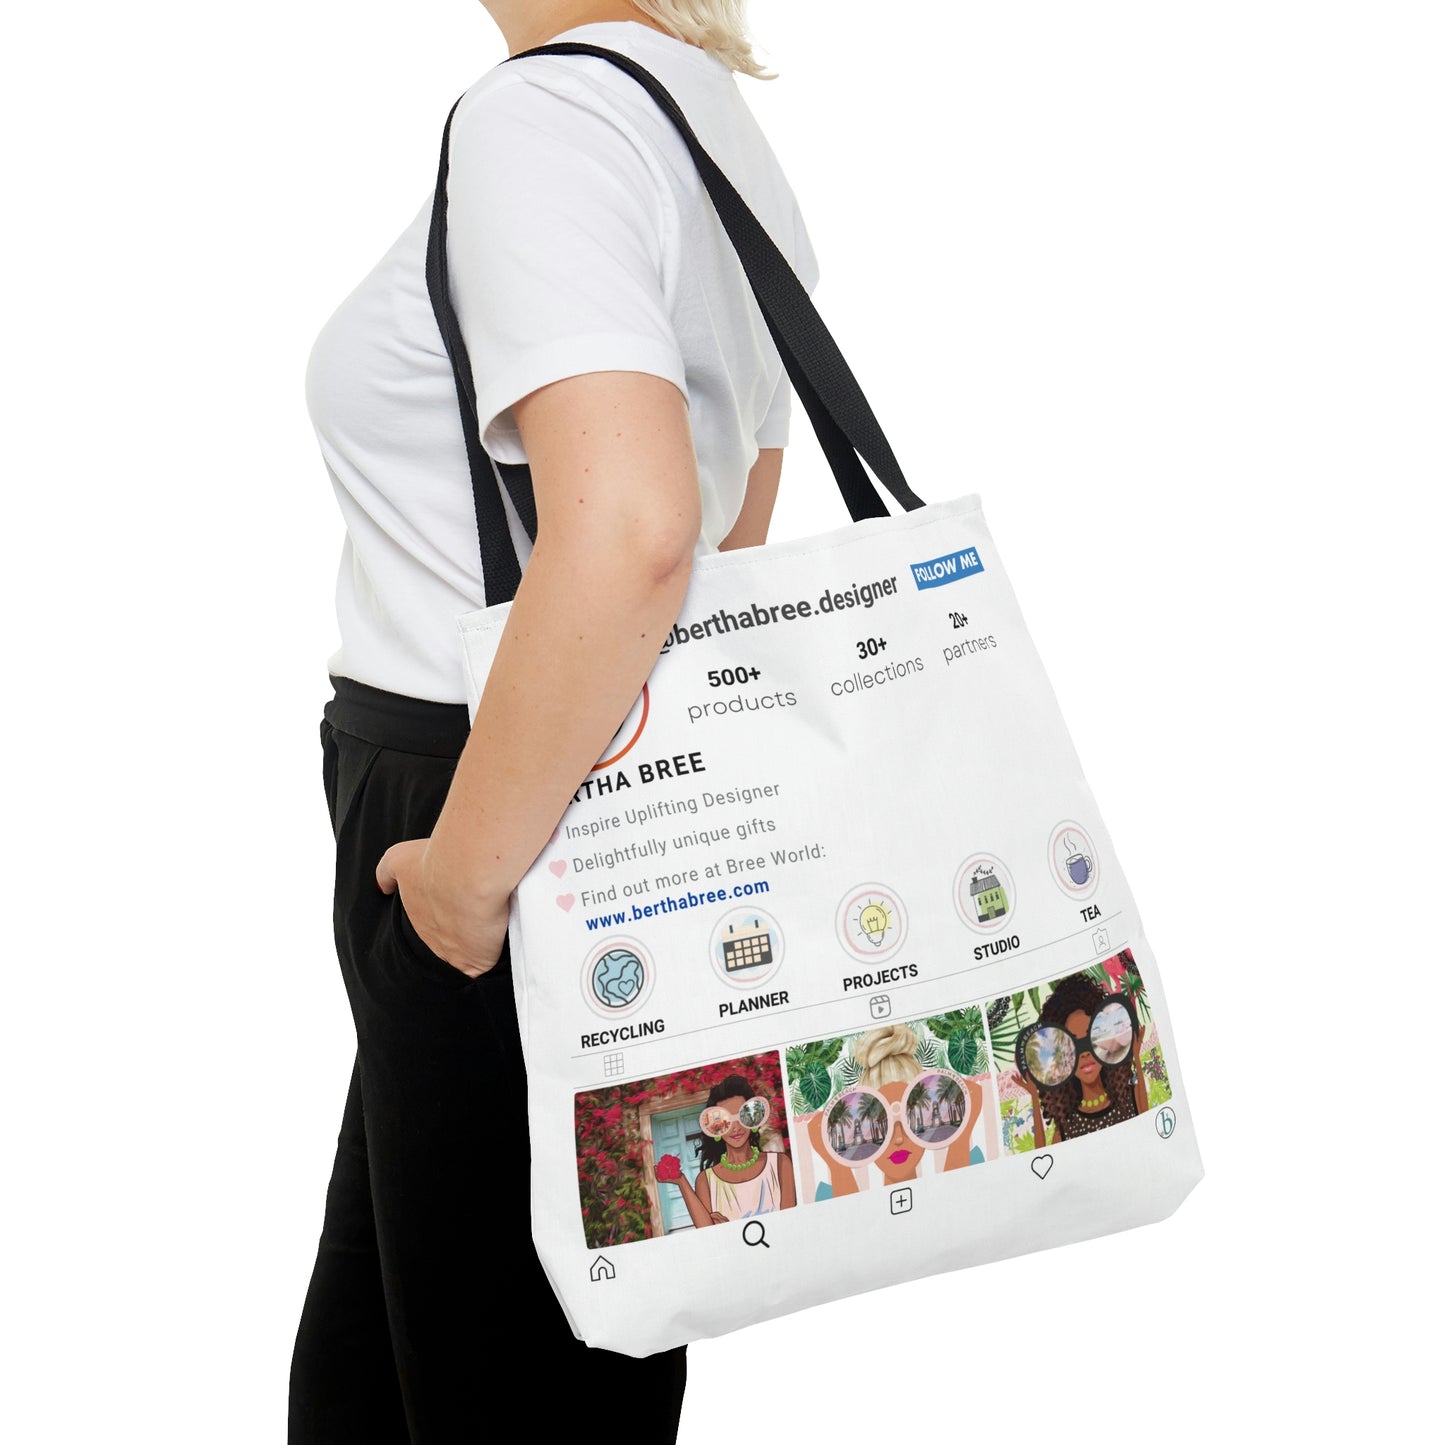 INSTAGRAM PERSONALIZED TOTE BAG